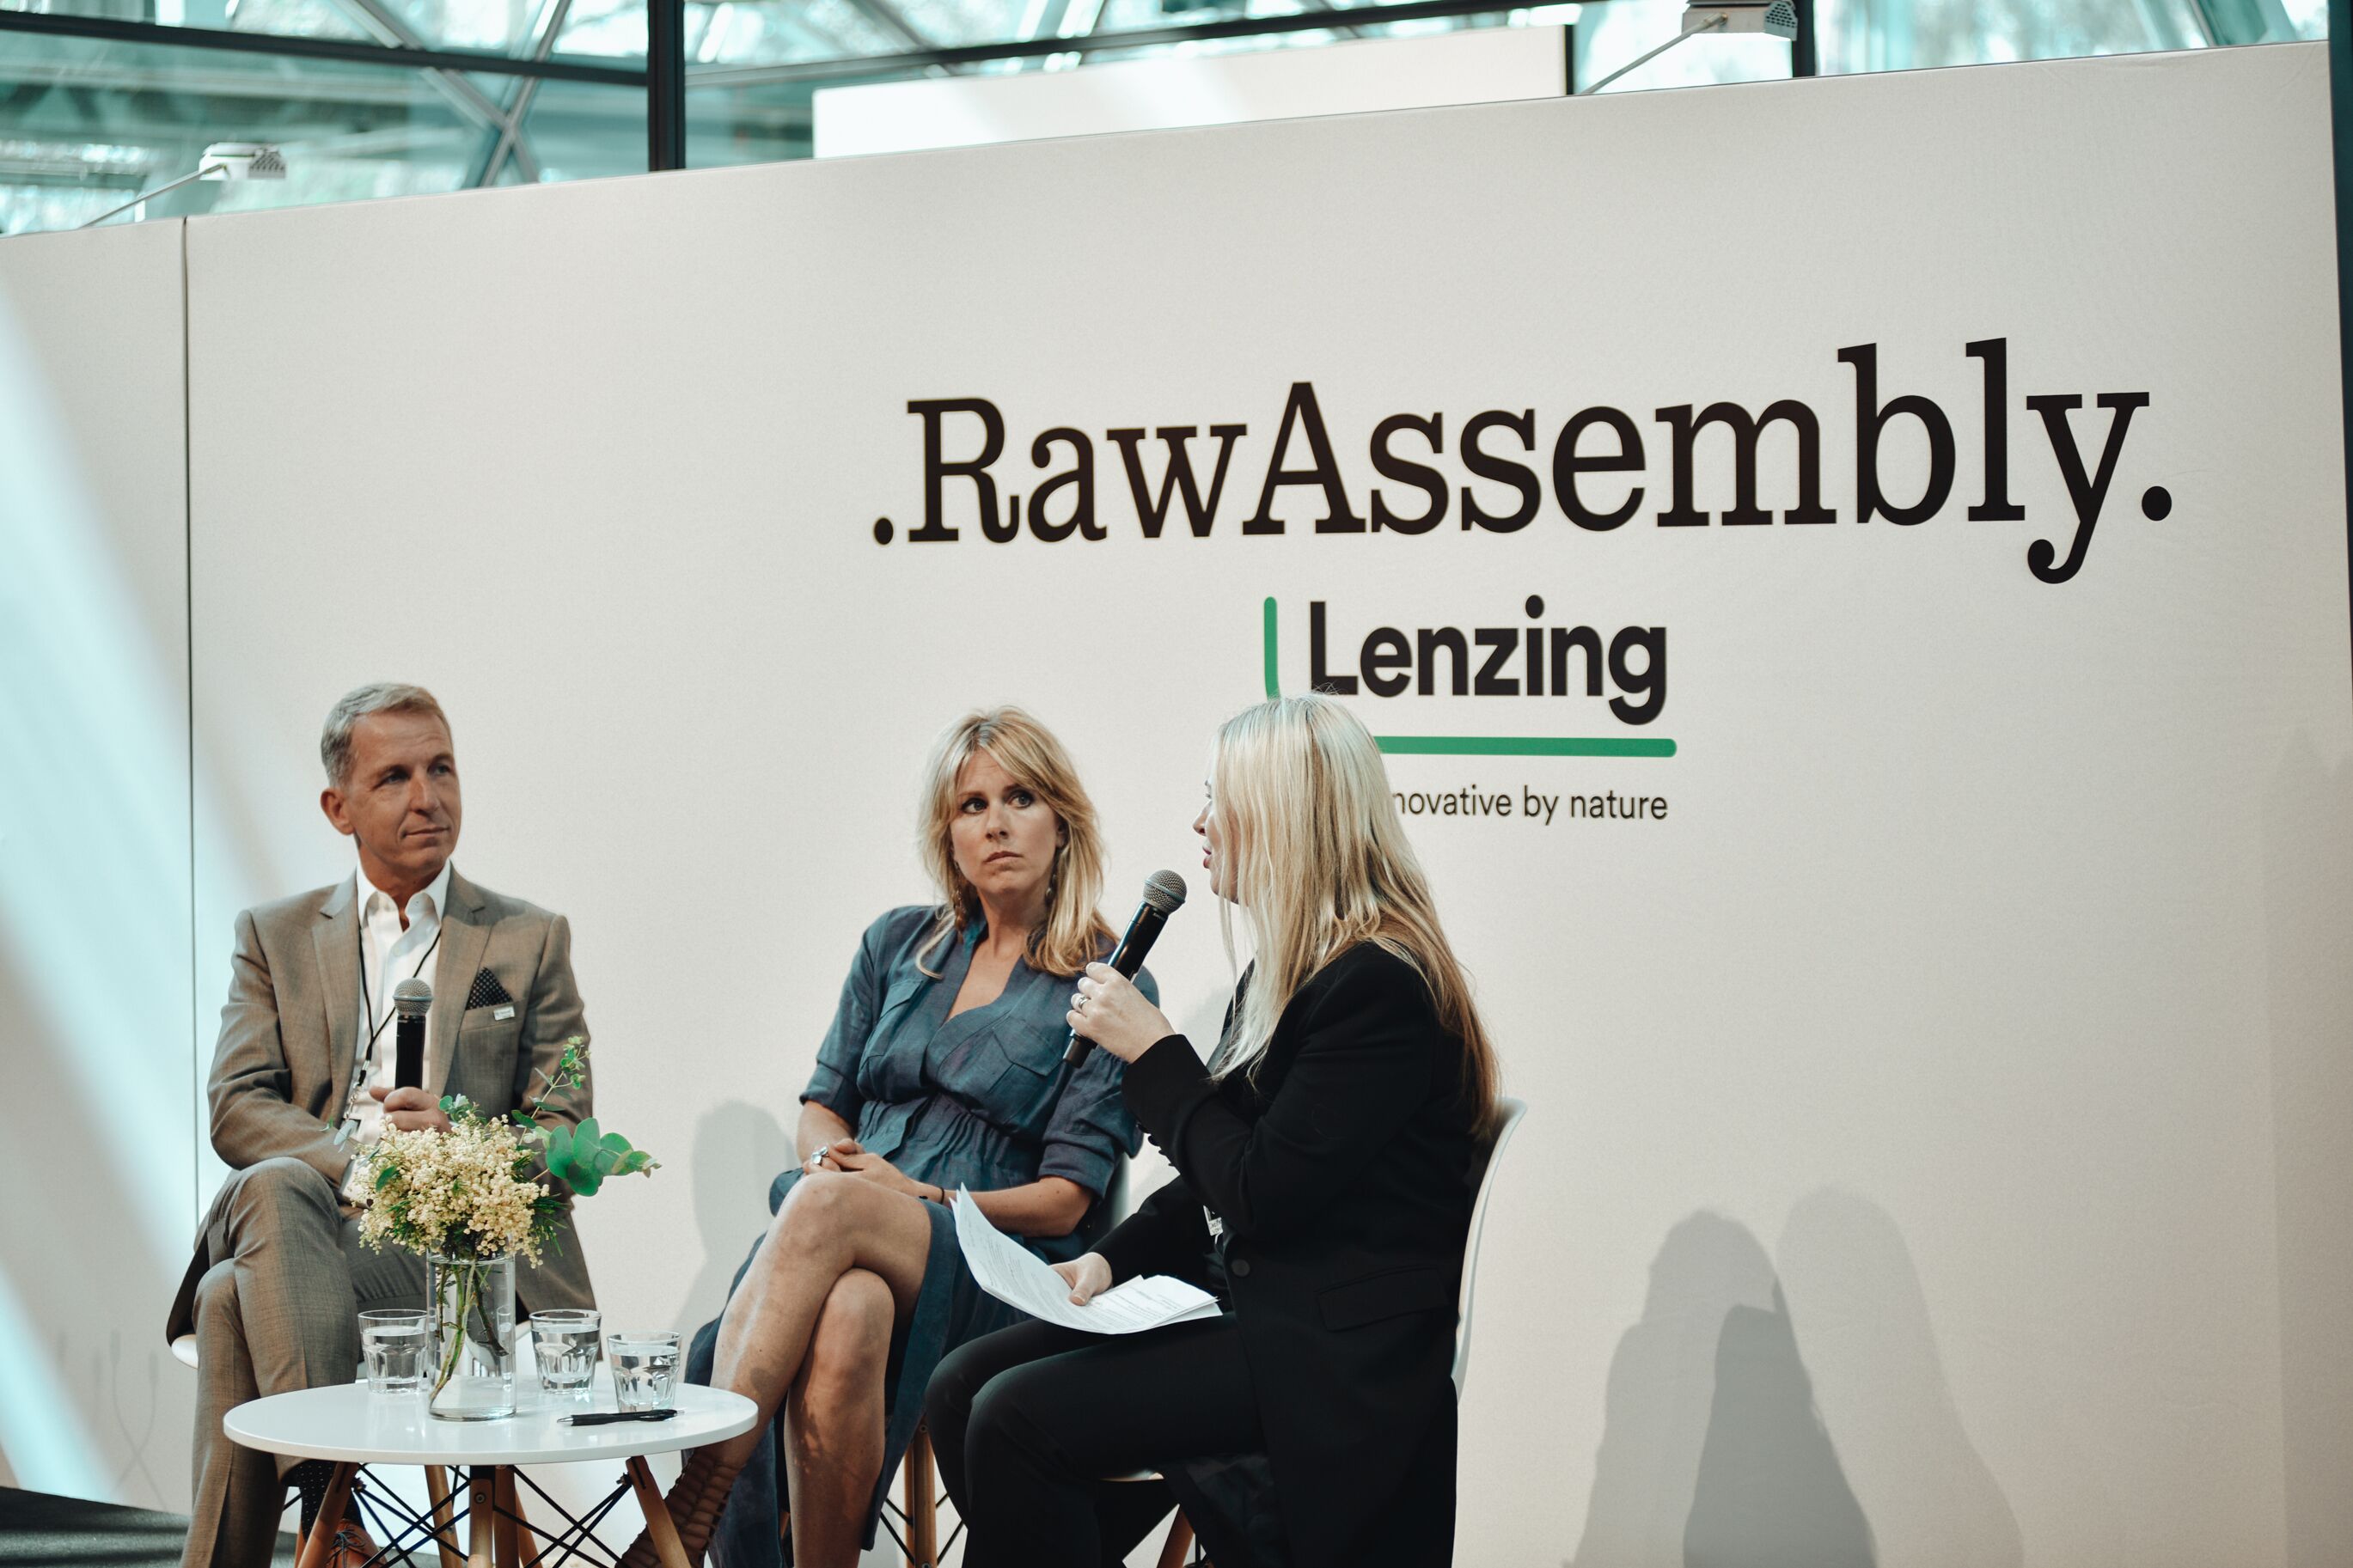 Panel discussion led by Clare Press. Image: Raw Assembly.